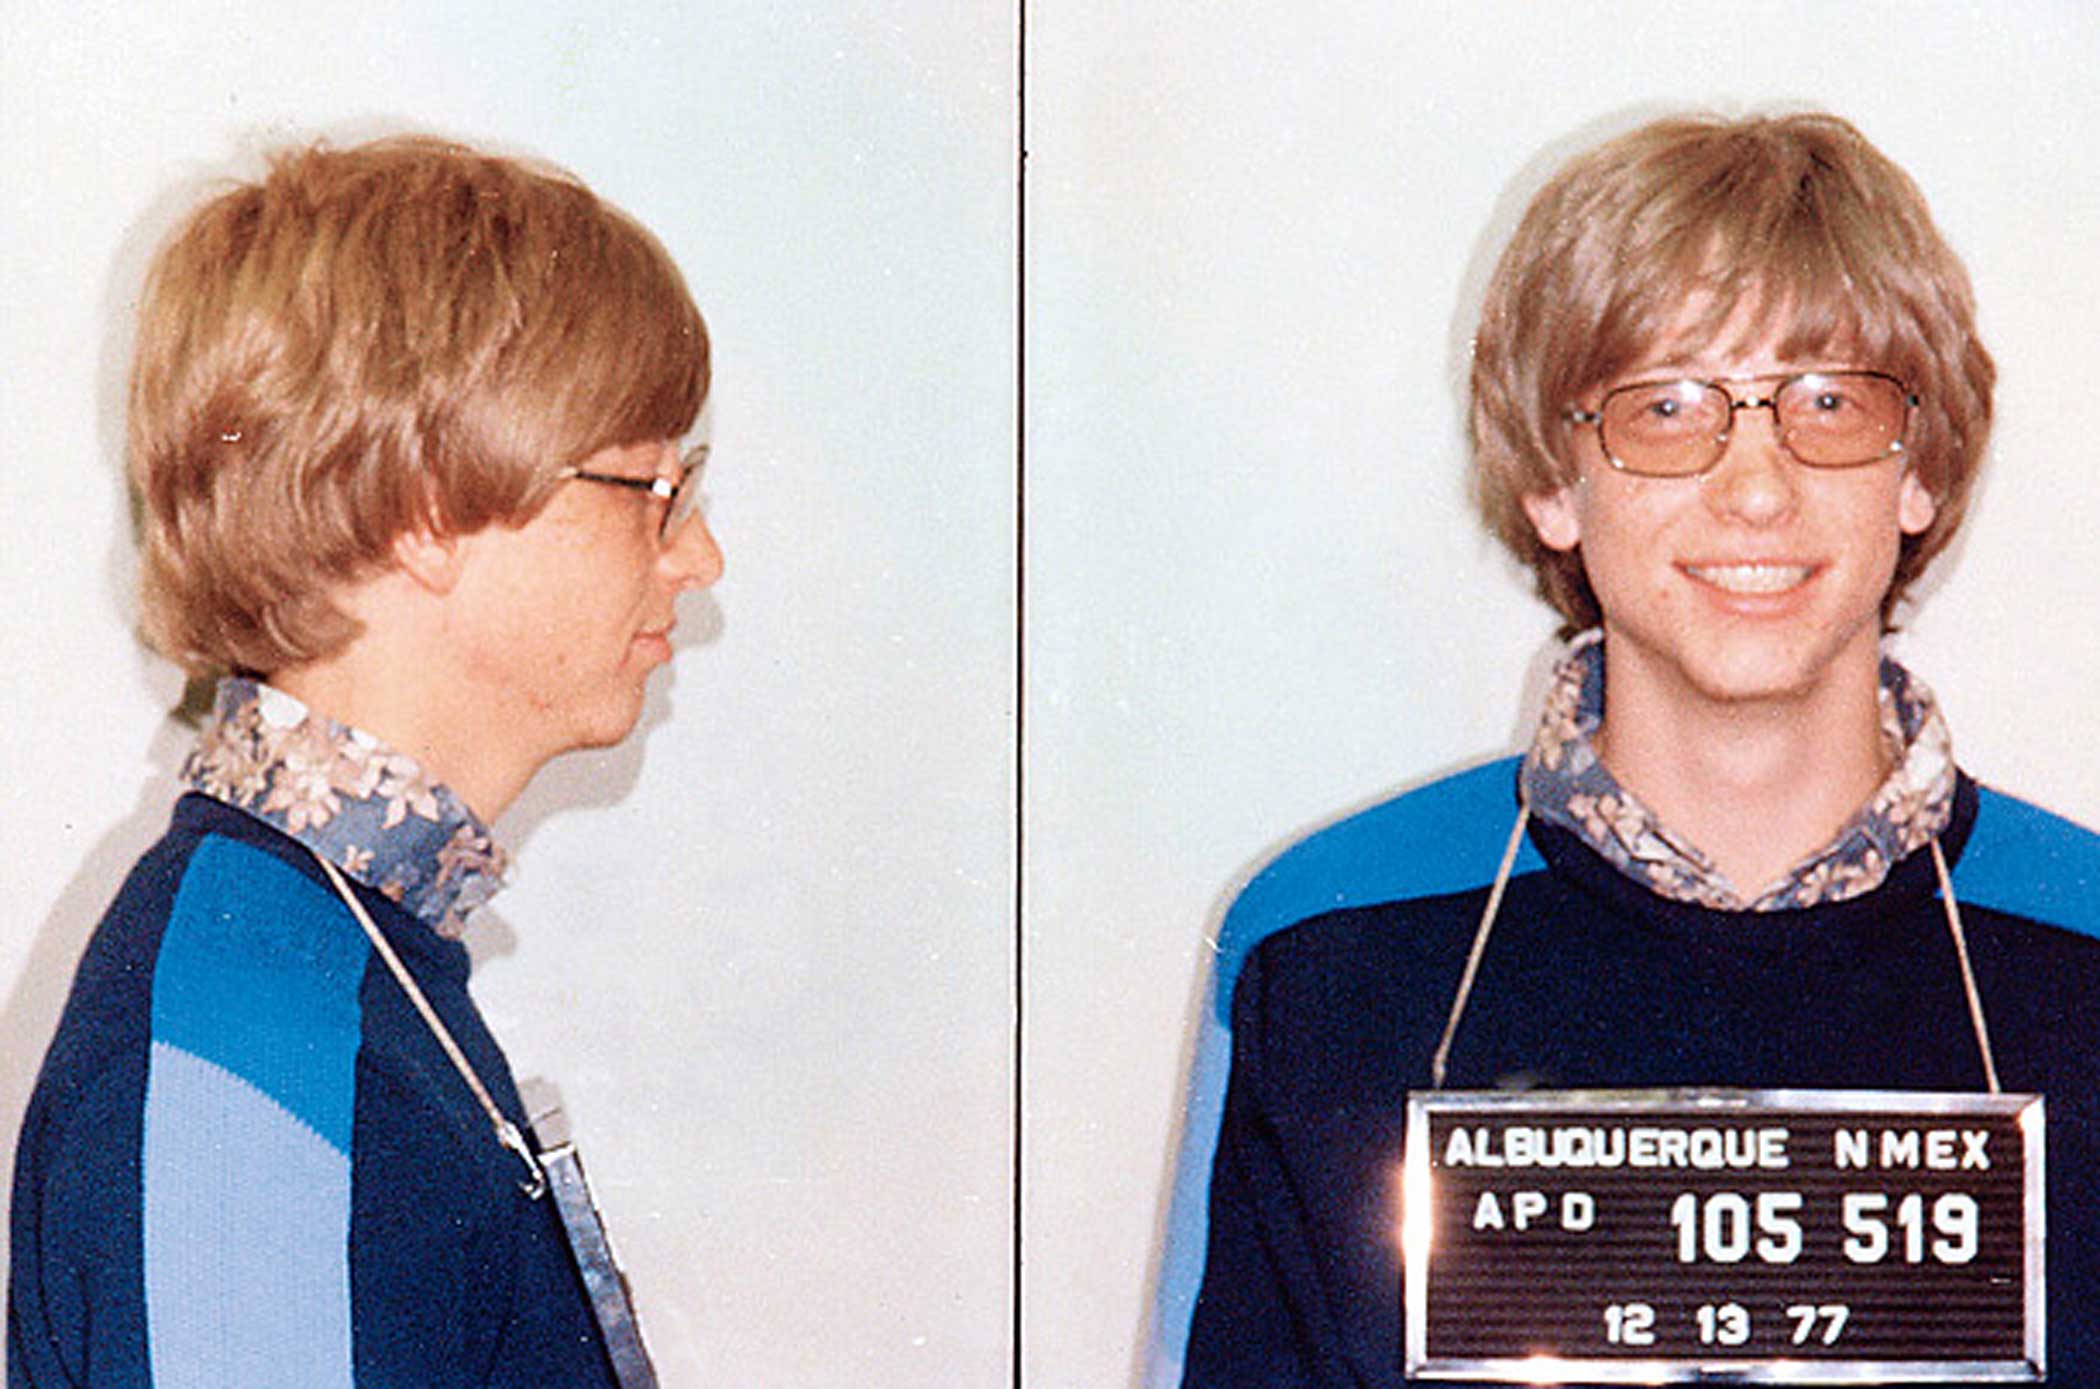 Photo of Bill Gates mug shot from the book "The Dog Dialed 911."Filename: 116570.jpgTake/Roll/Frame: Date Taken: November 1, 2006Photographer: Agency: SMOKING GUNCity: State: Country: US Reference: 21148Filing Place:?Location: Photo #: 13111098Keywords: "BILLGATES" Selling rights: NOwned? NoSyndicator: AGENCYPixels x Scans: 1466 x 1032Input Date: November 1, 2006 16:51Date last Output: (unknown date)Date last Published: November 13, 2006Series: PEOPLE Title: